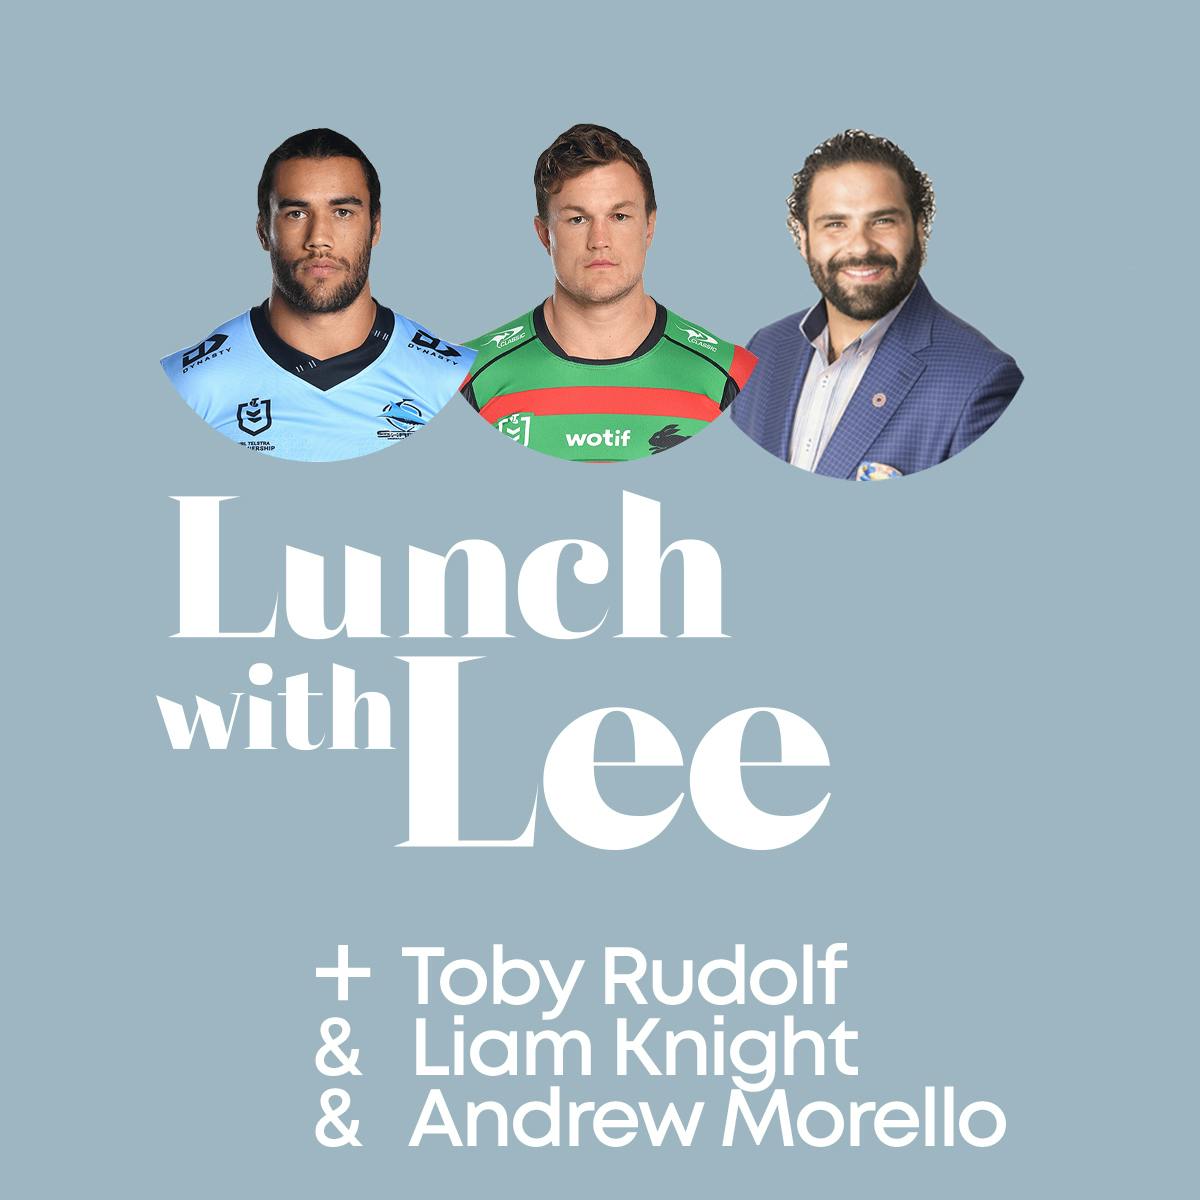 Lunch with Toby Rudolf, Liam Knight and Andrew Morello